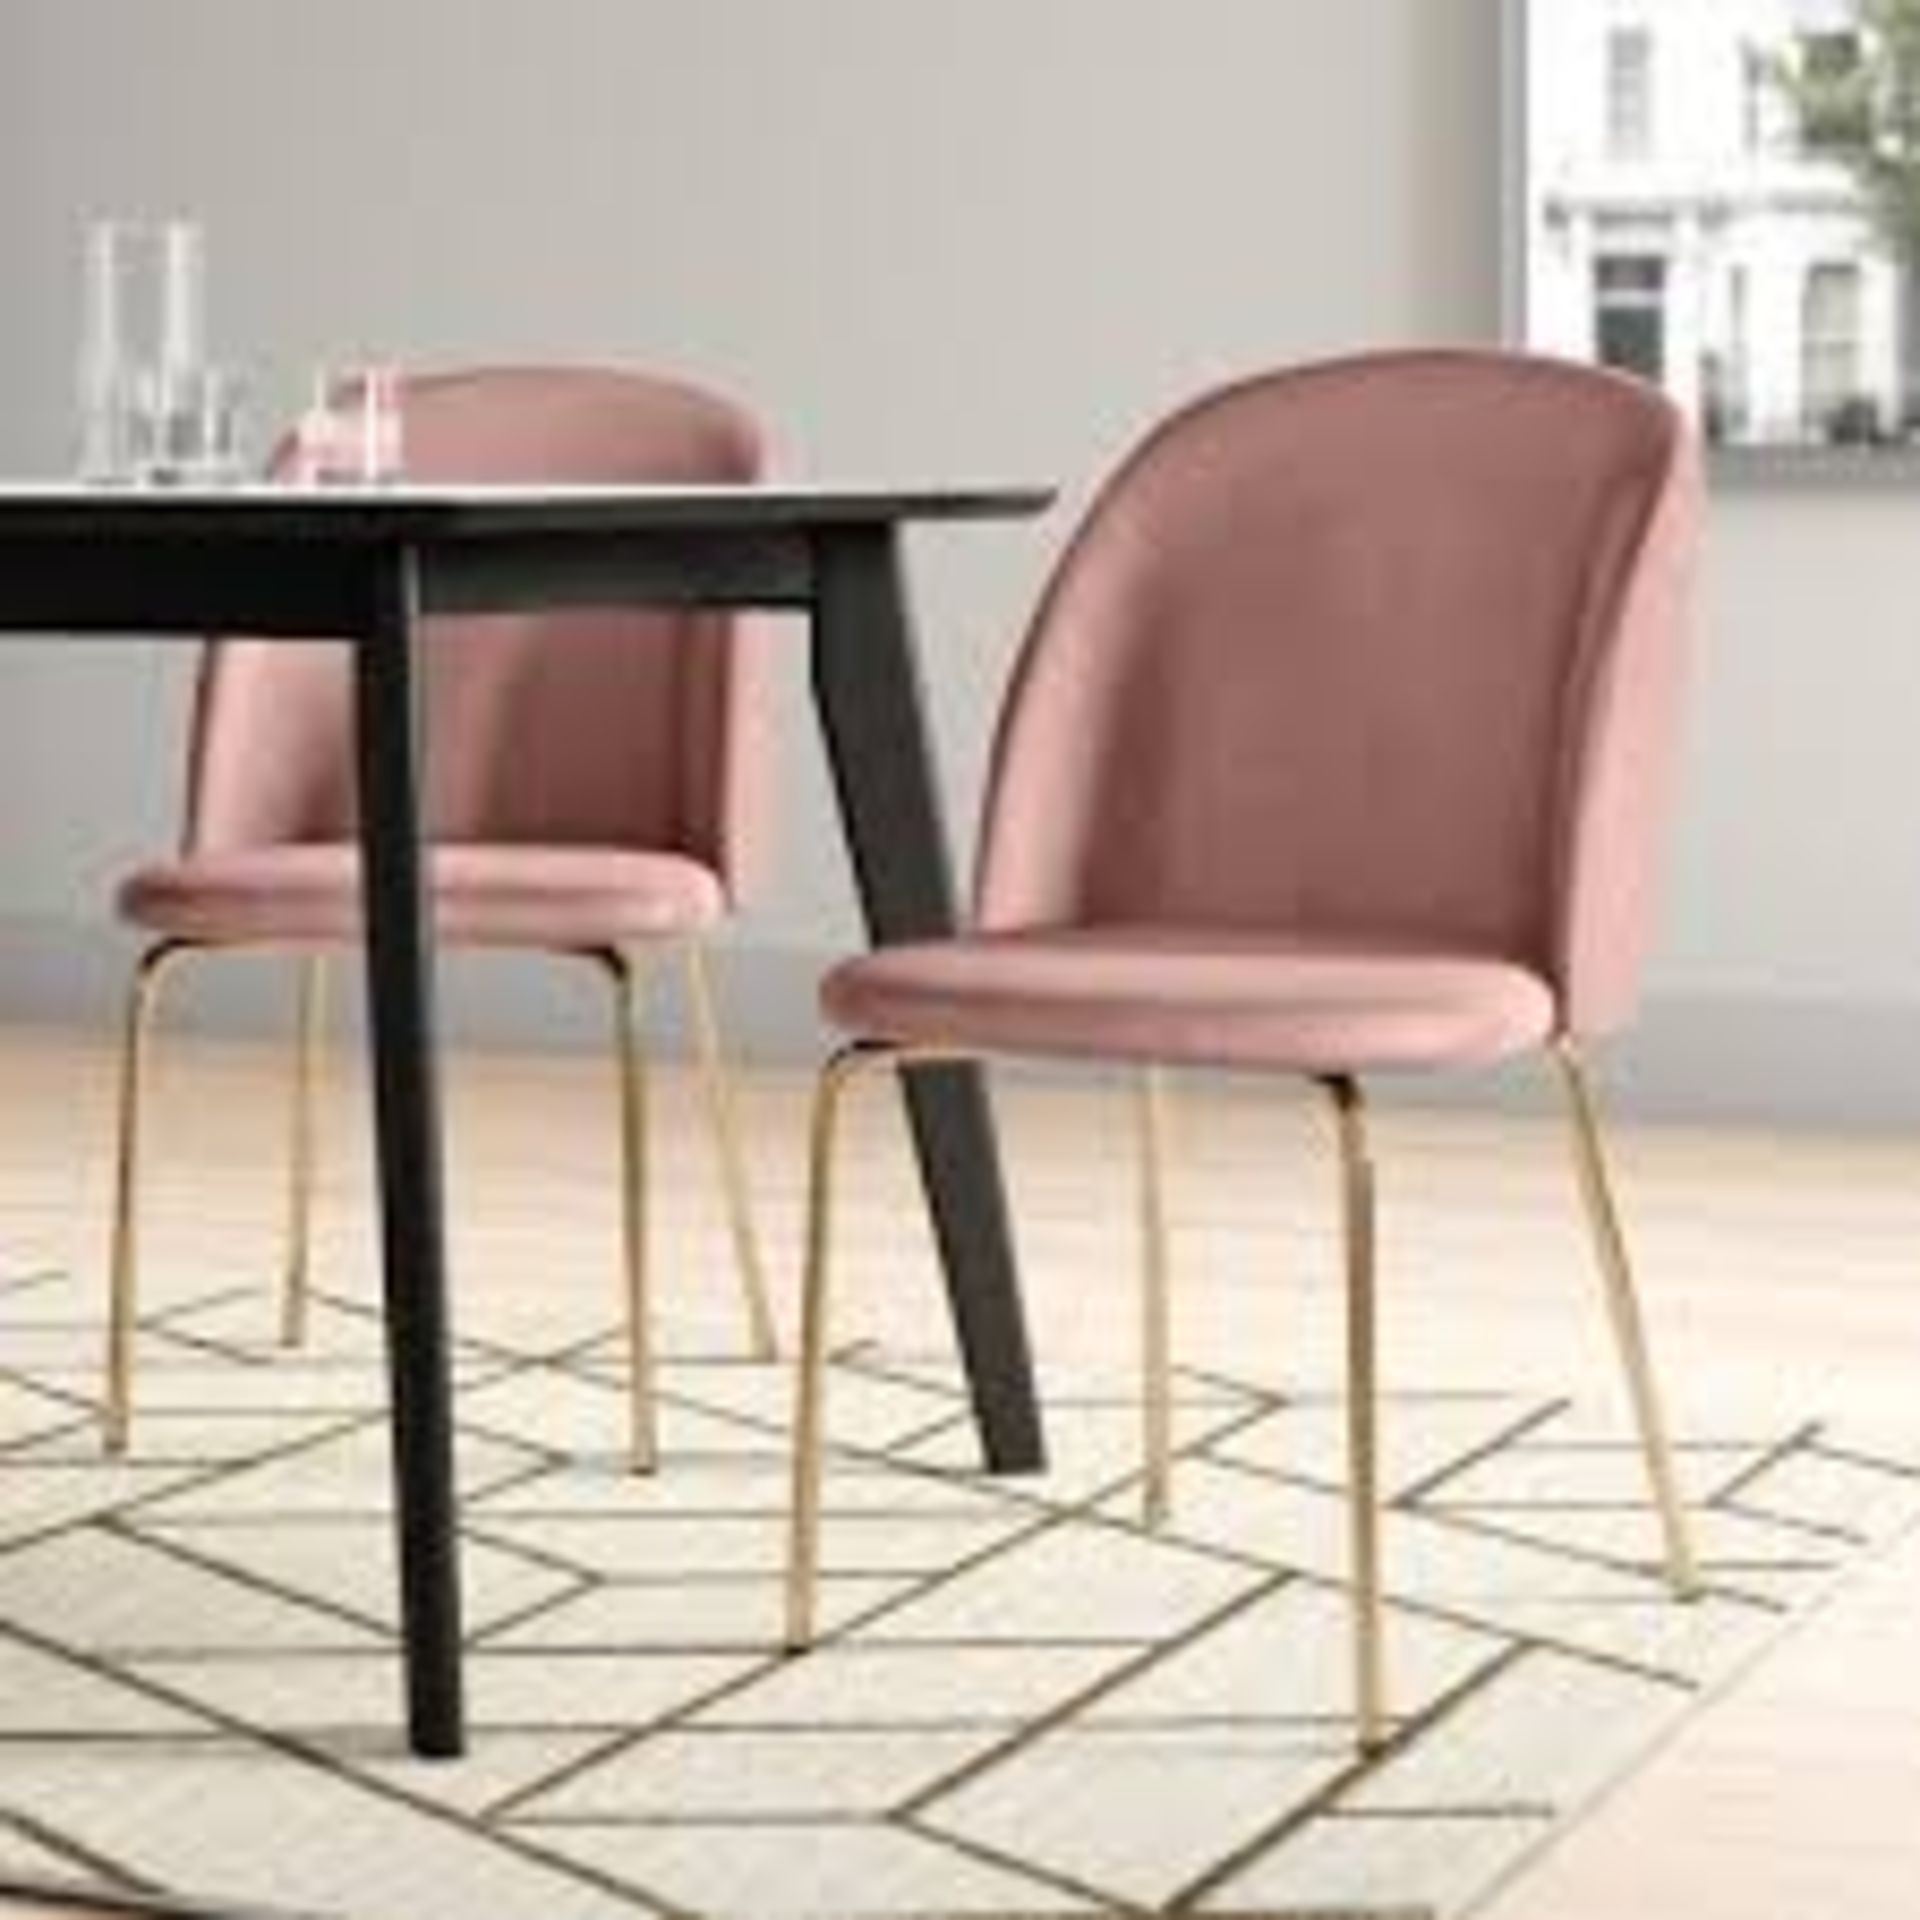 Boxed Marisol Leyland Pink Upholstered Dining Chairs RRP £85 (18100) (Pictures Are For